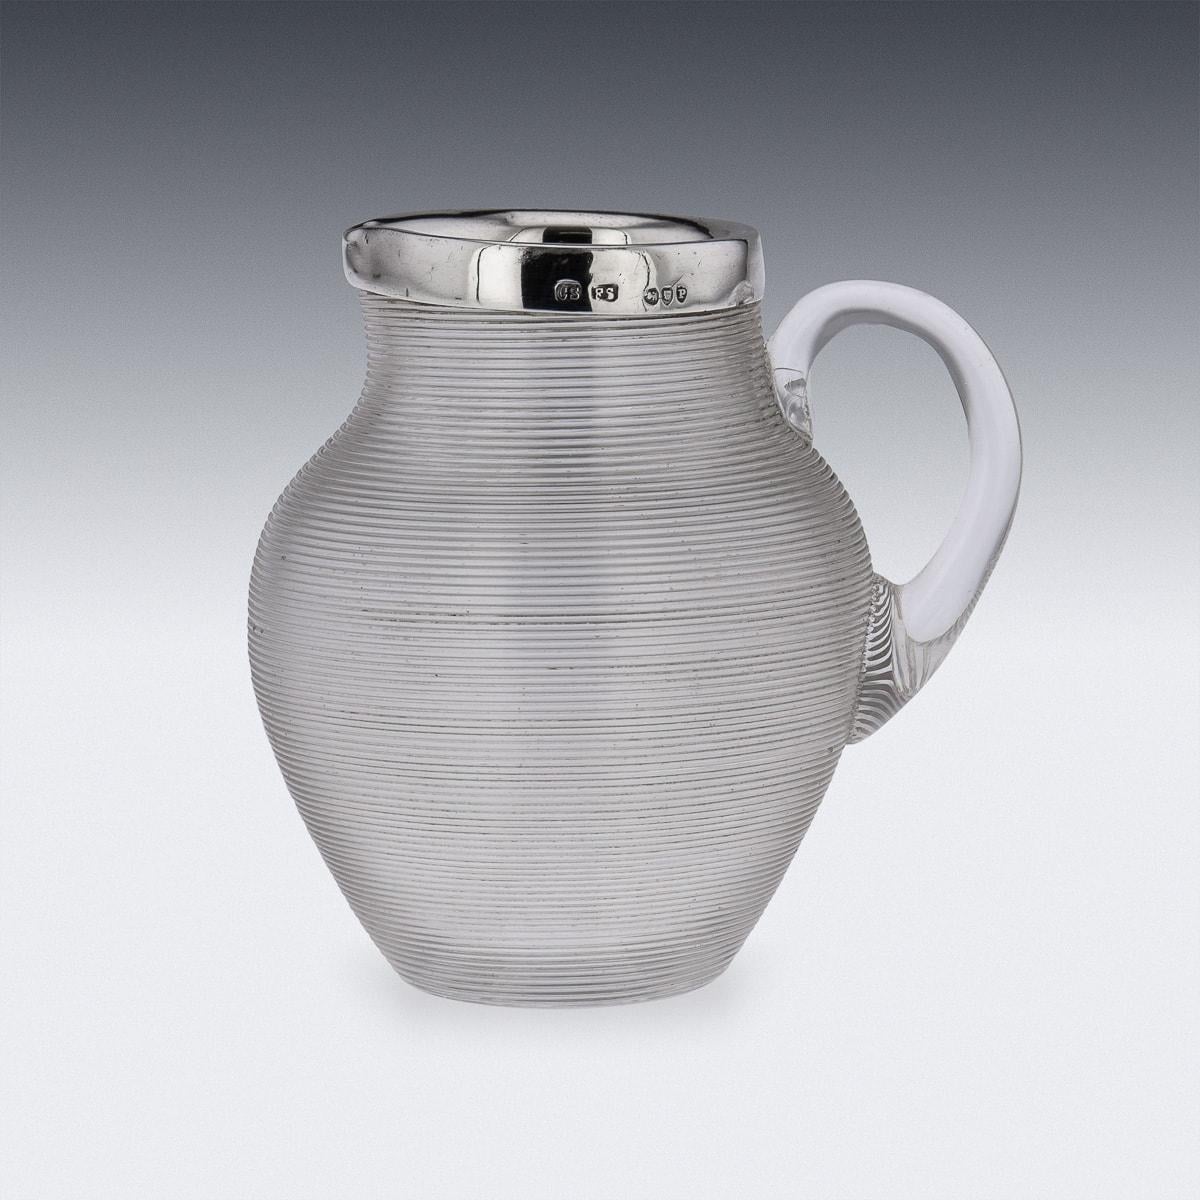 Antique 19th Century Victorian silver mounted and textured glass match striker in a shape of a cream jug, mounted with a plane silver collar. Hallmarked English silver, (925 standard), London, year 1890 (p), Maker CS FS (Cornelius Desormeaux